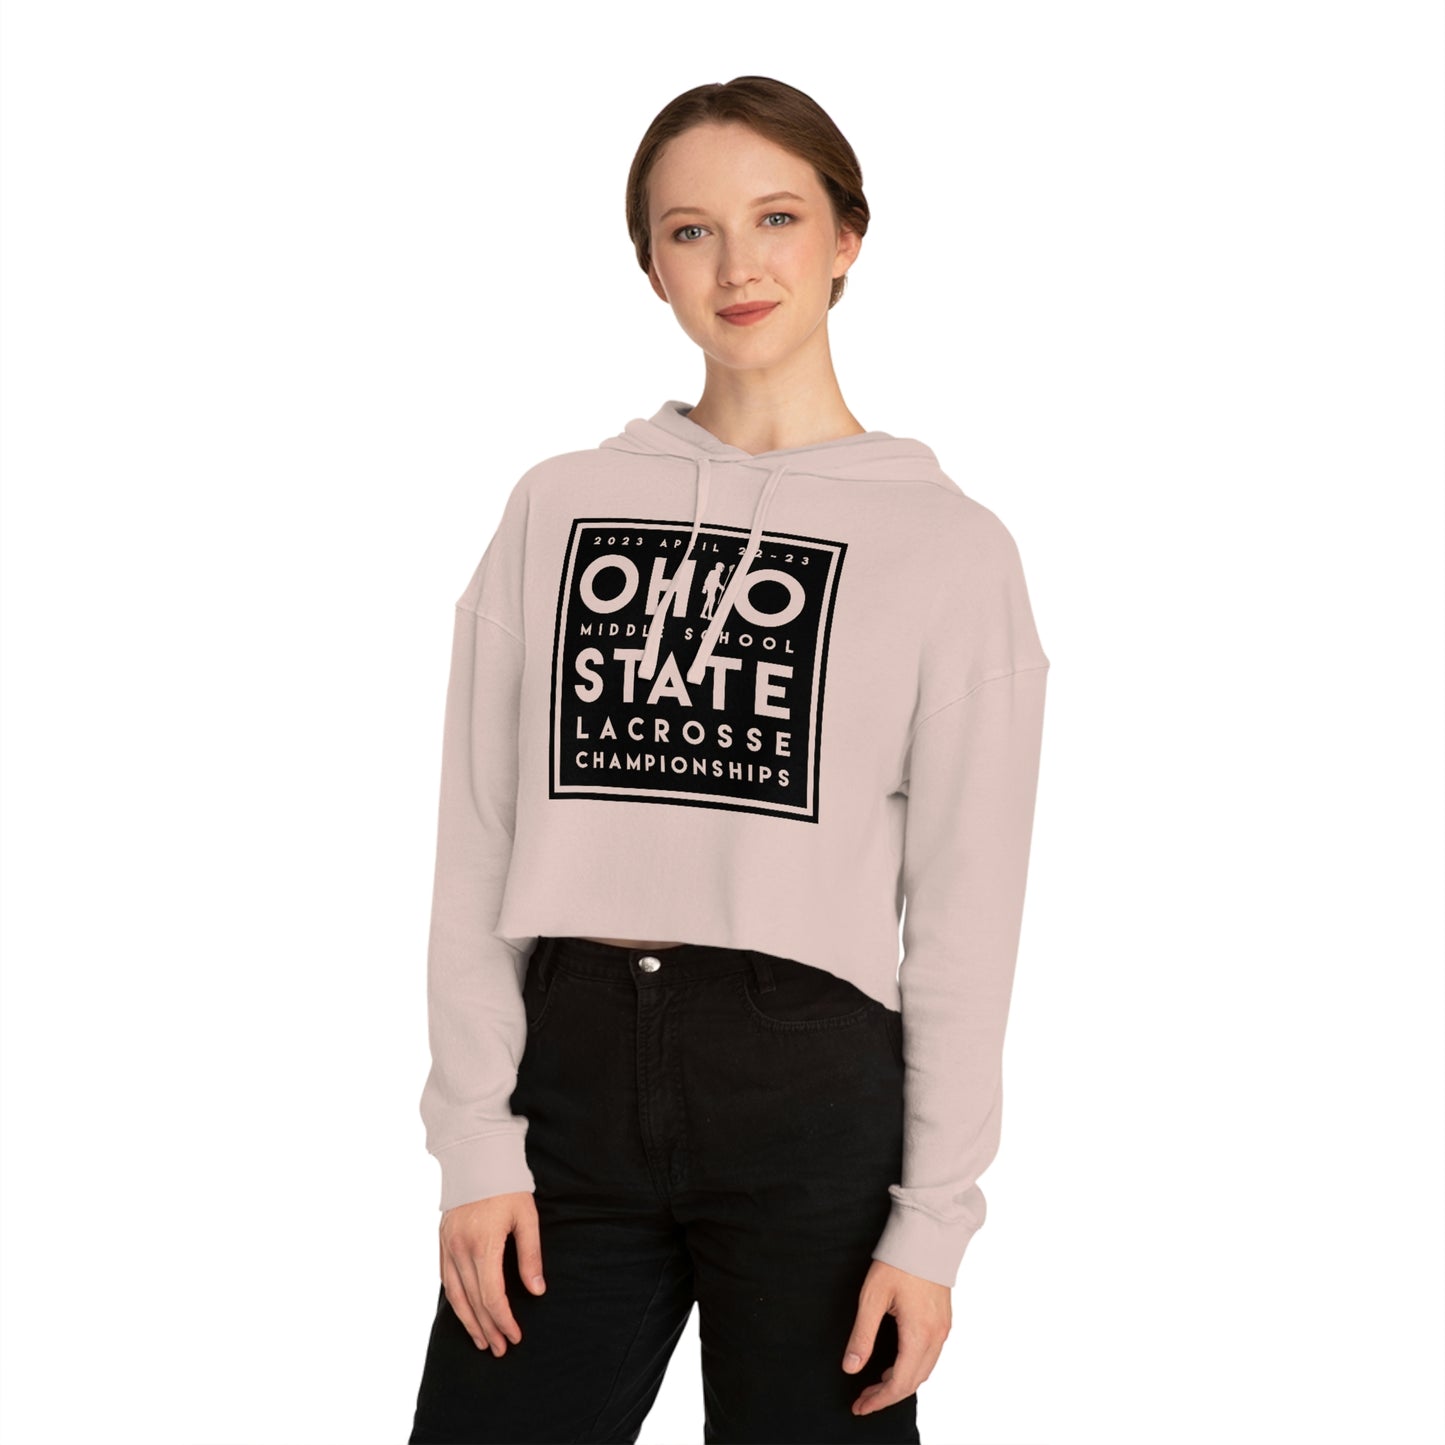 OHIO (PLAYER SUBSTITUTION) STATE LACROSSE CHAMPIONSHIPS-Women’s Cropped Hooded Sweatshirt